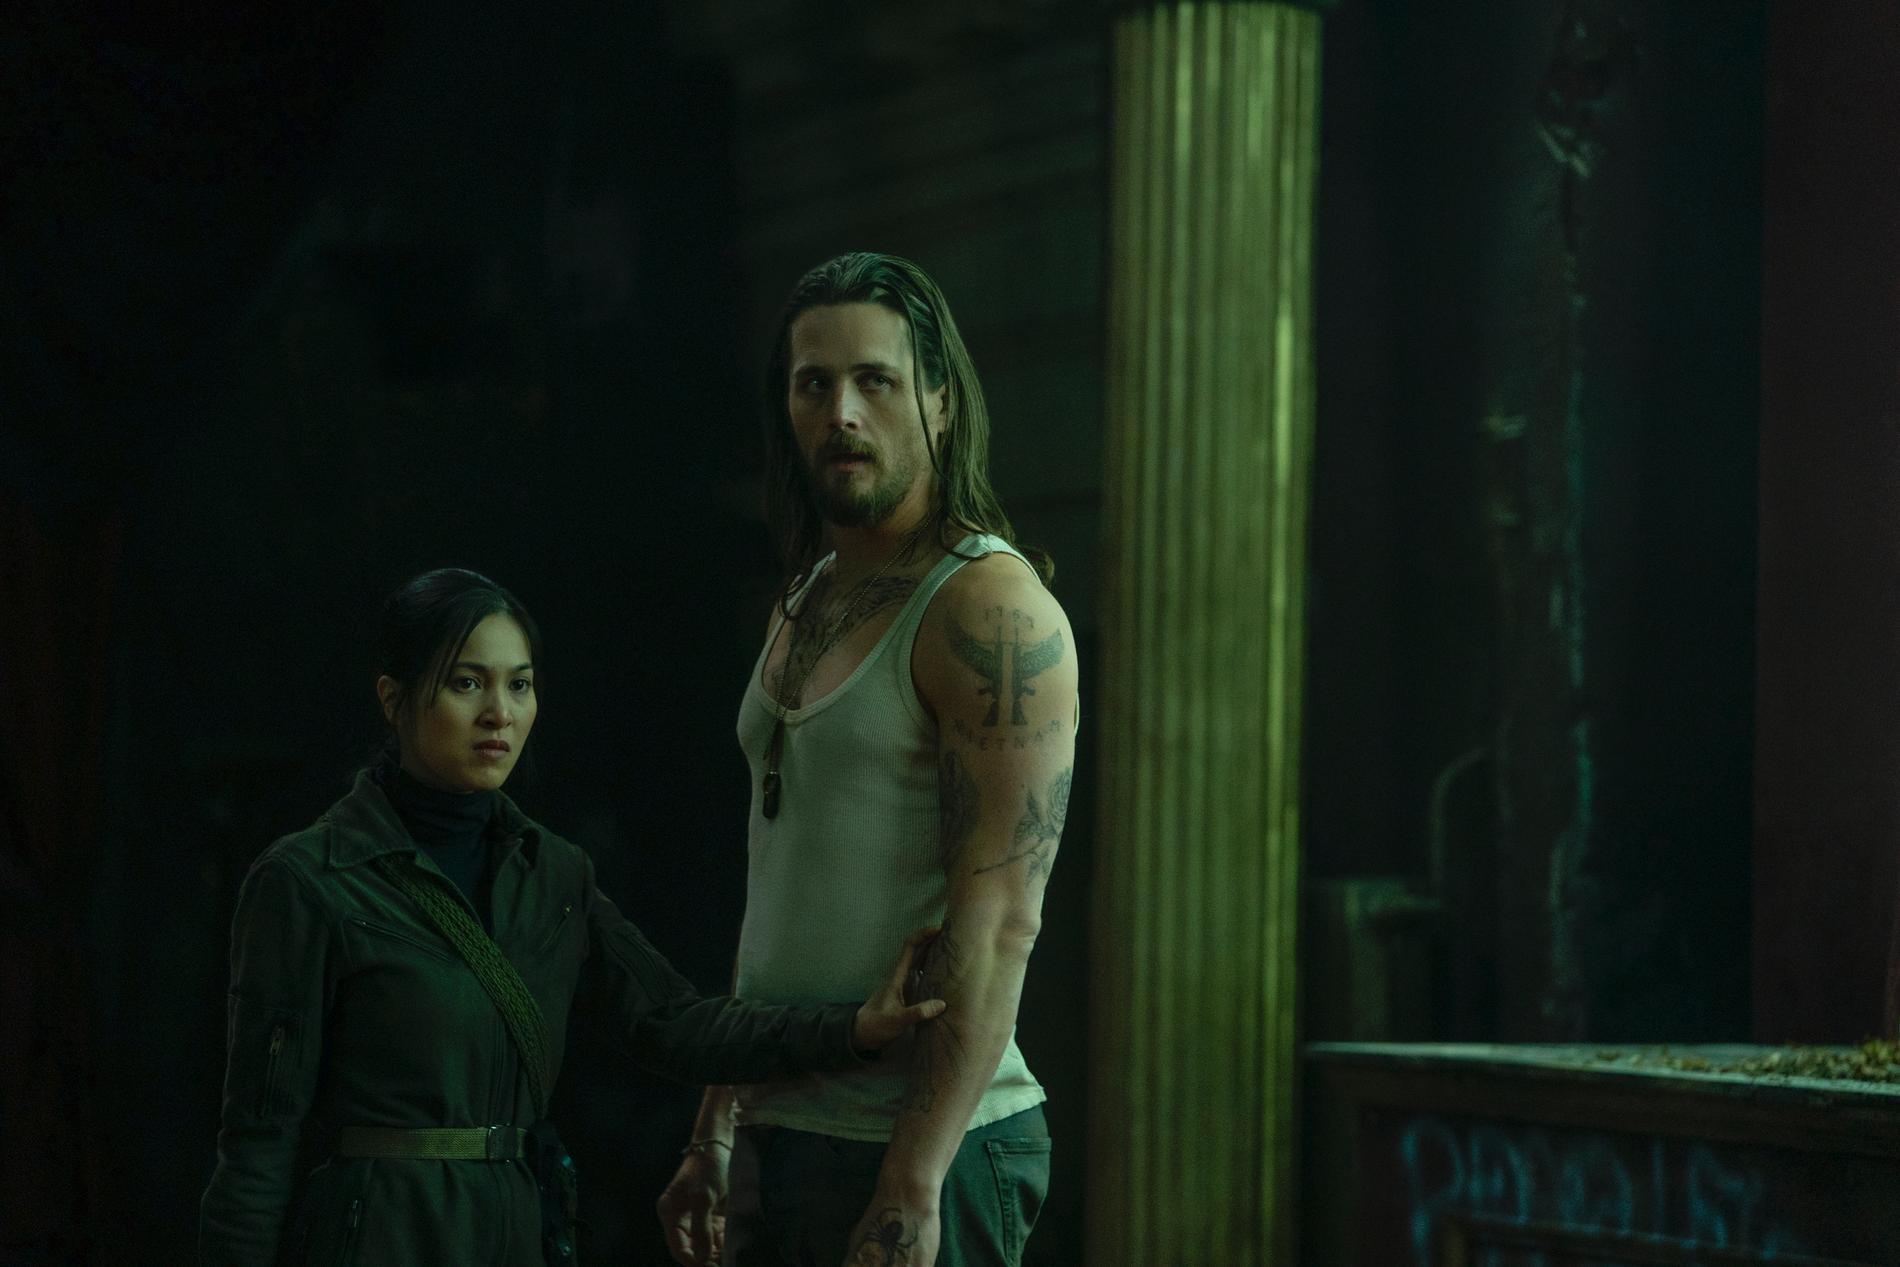 The Lost Brother: Ben Robson as Frankie Scott in the movie 